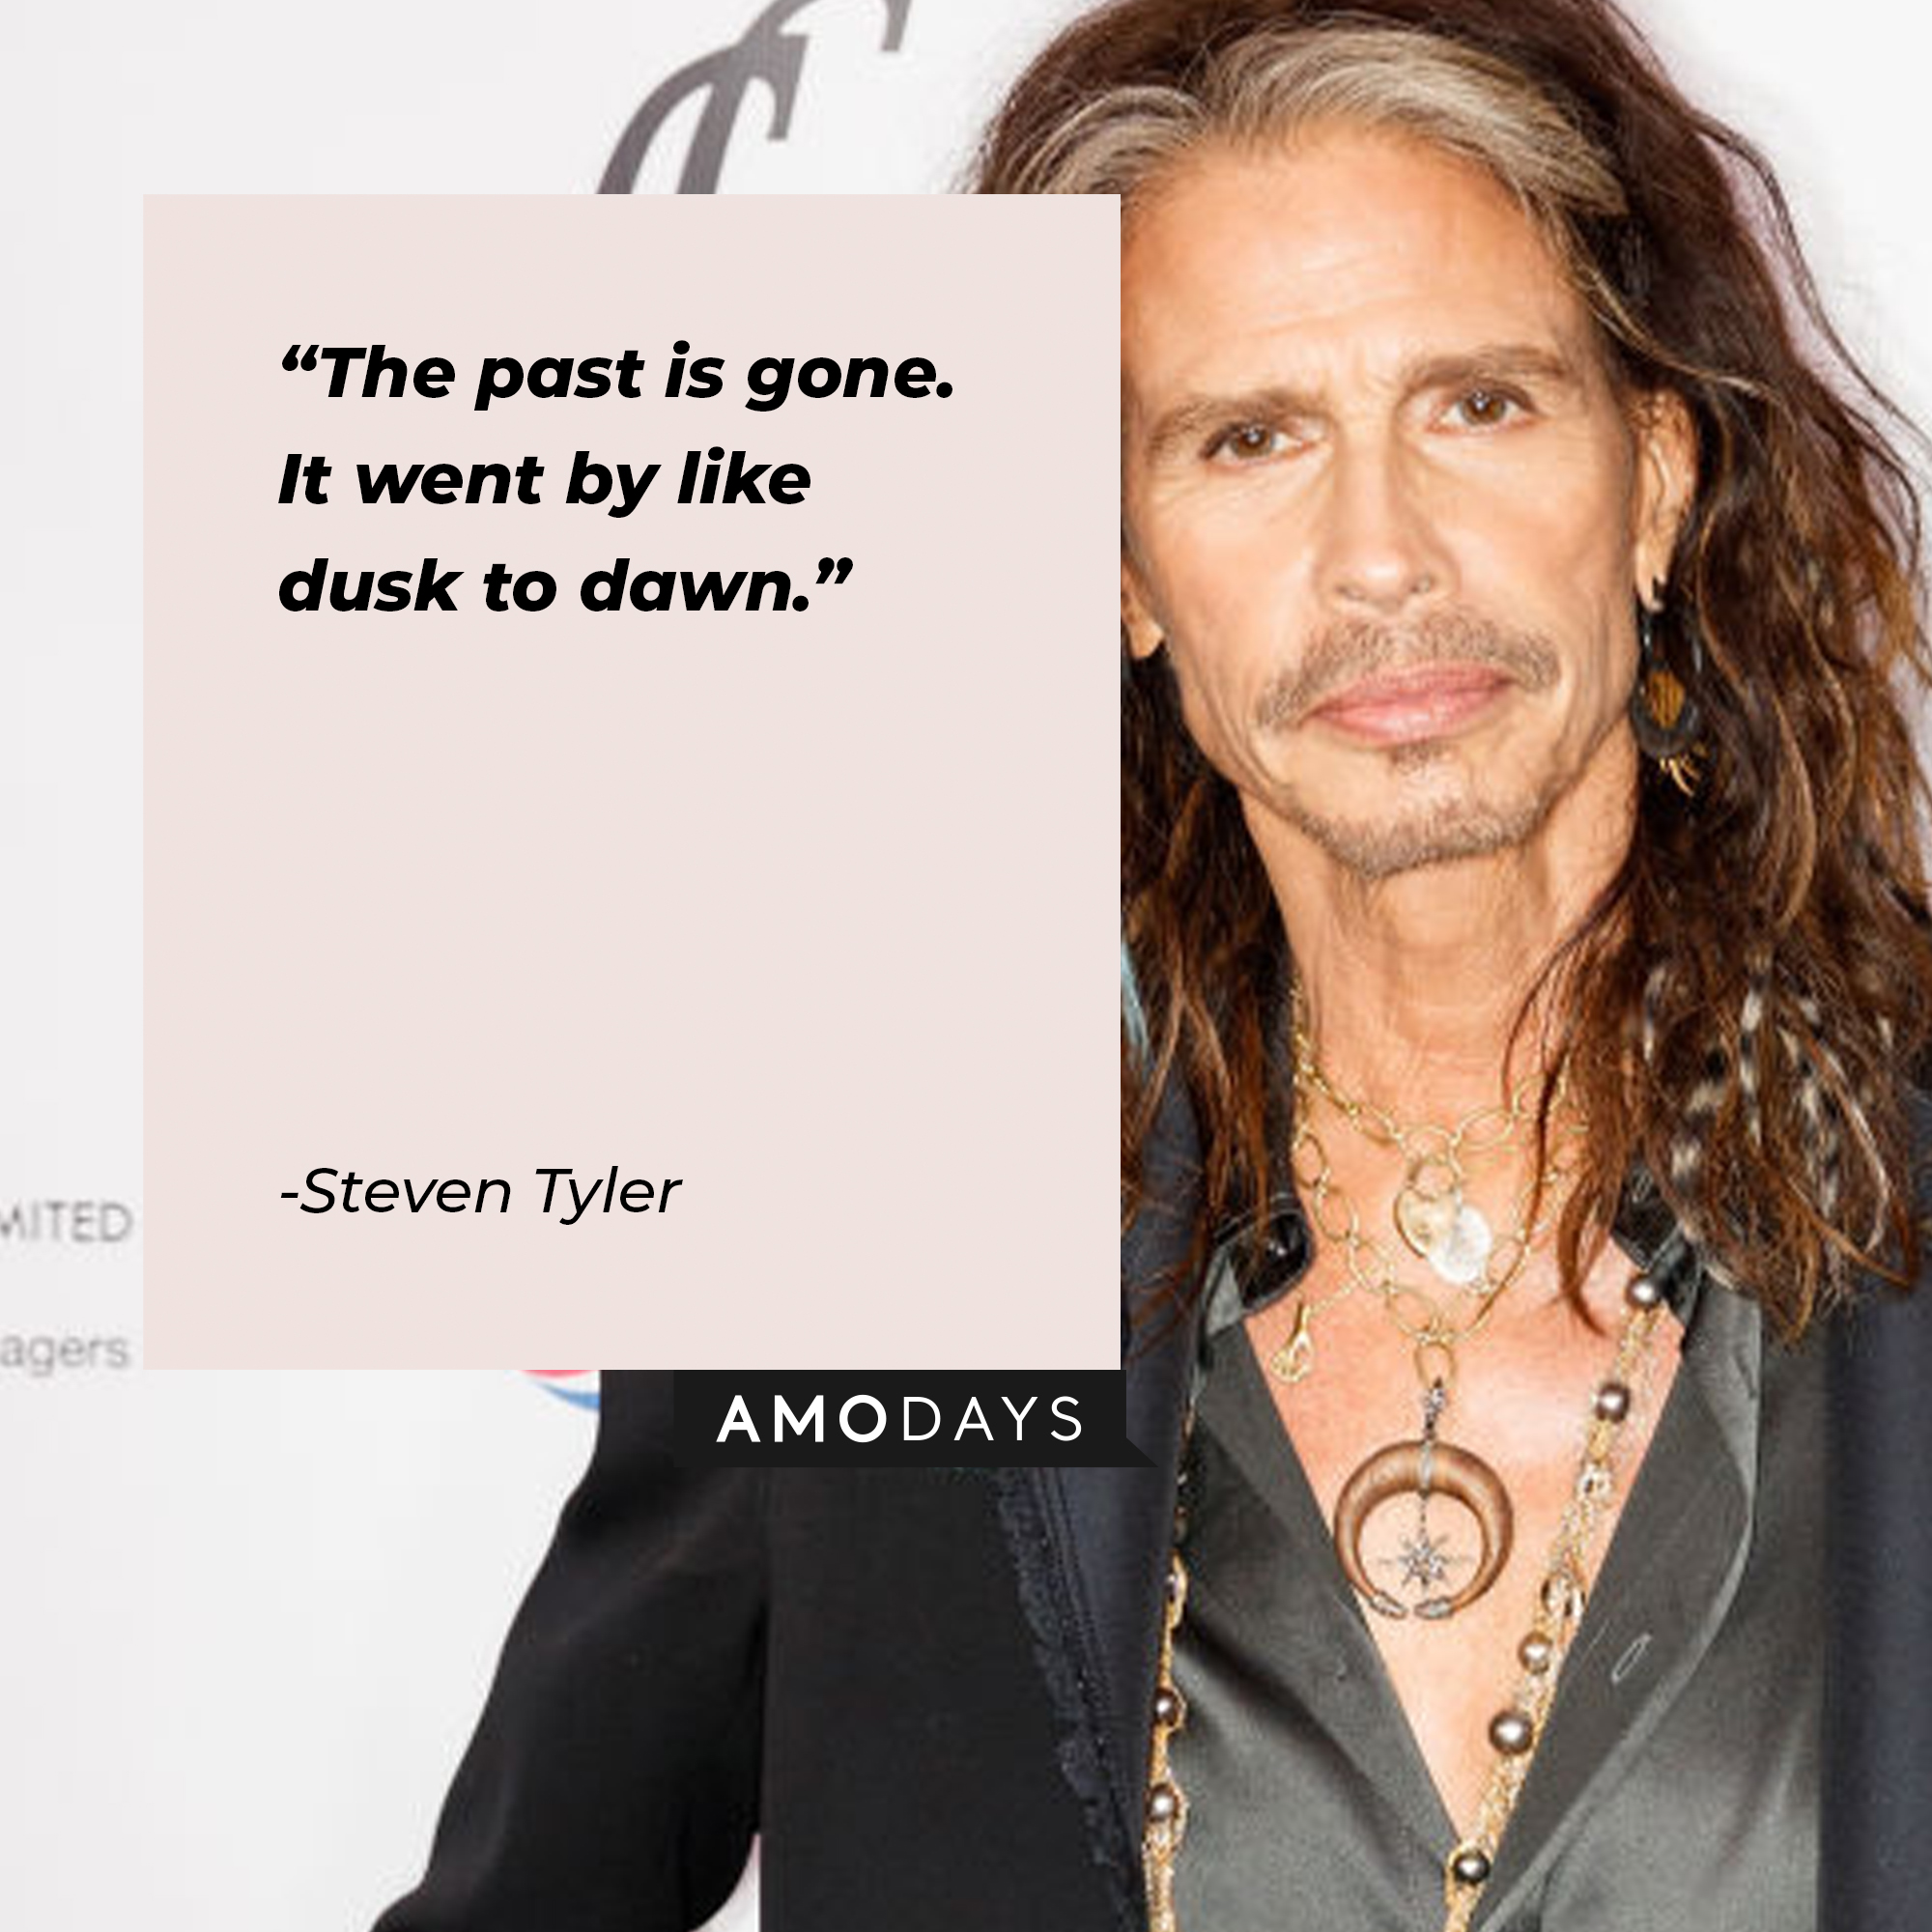 Steven Tyler's quote: "The past is gone. It went by like dusk to dawn." | Source: Getty Images